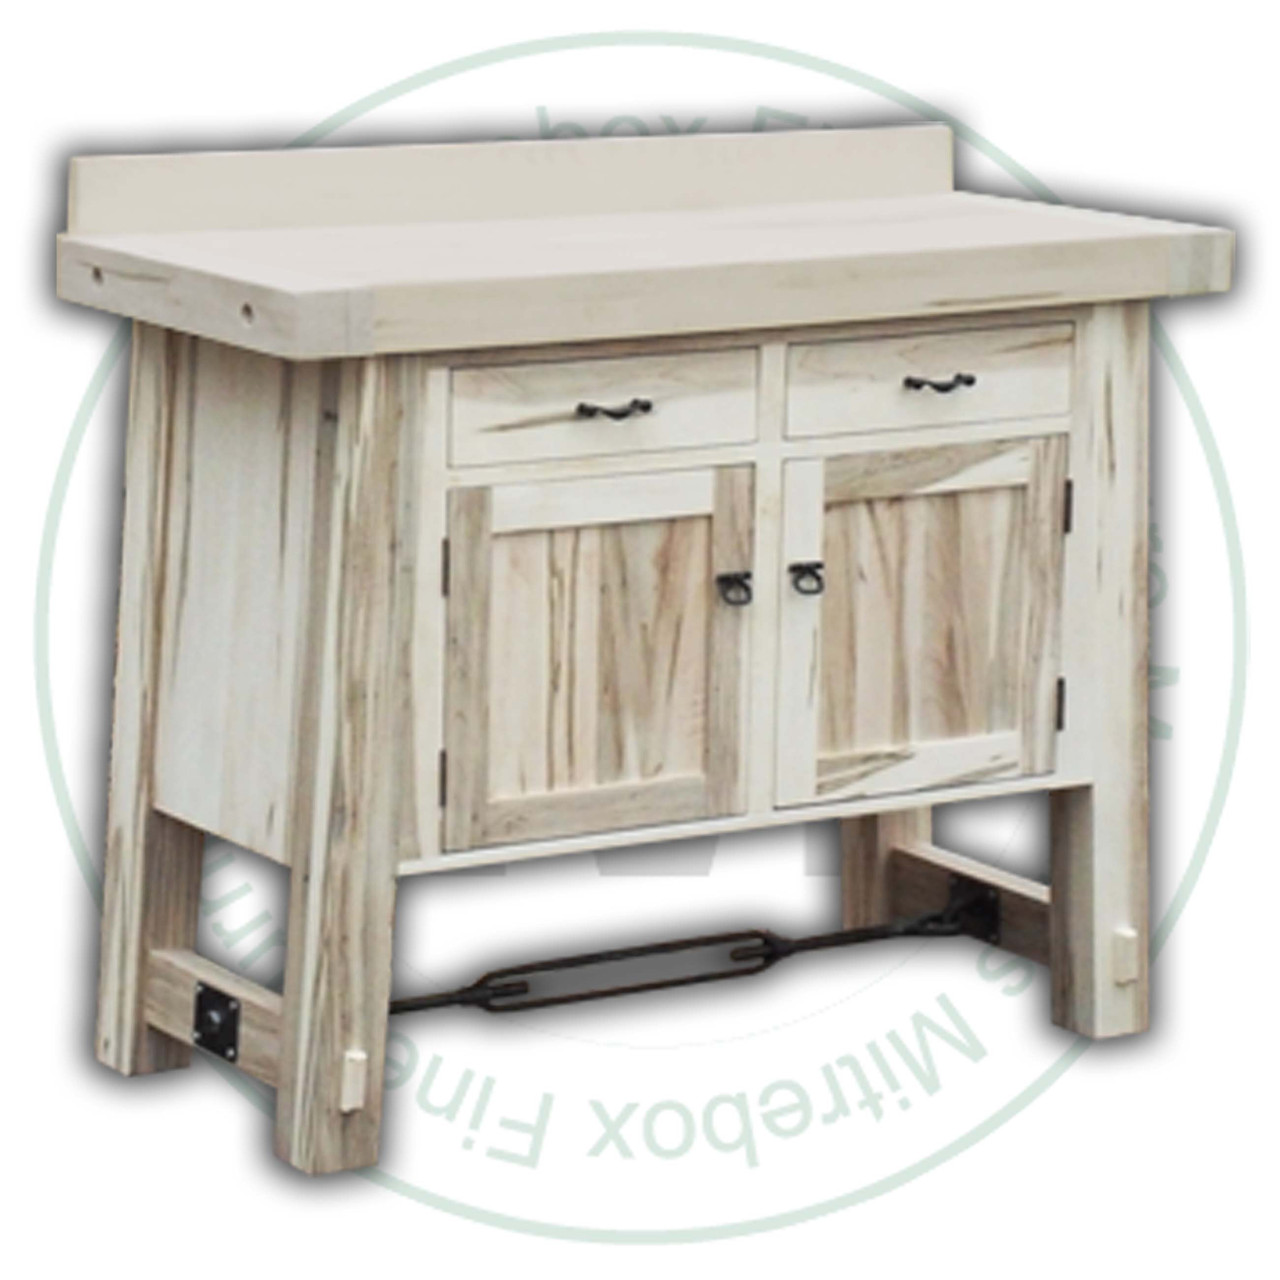 Wormy Maple Yukon Turnbuckle Sideboard 22''D x 52''W x 40''H With 2 Doors And 2 Drawers